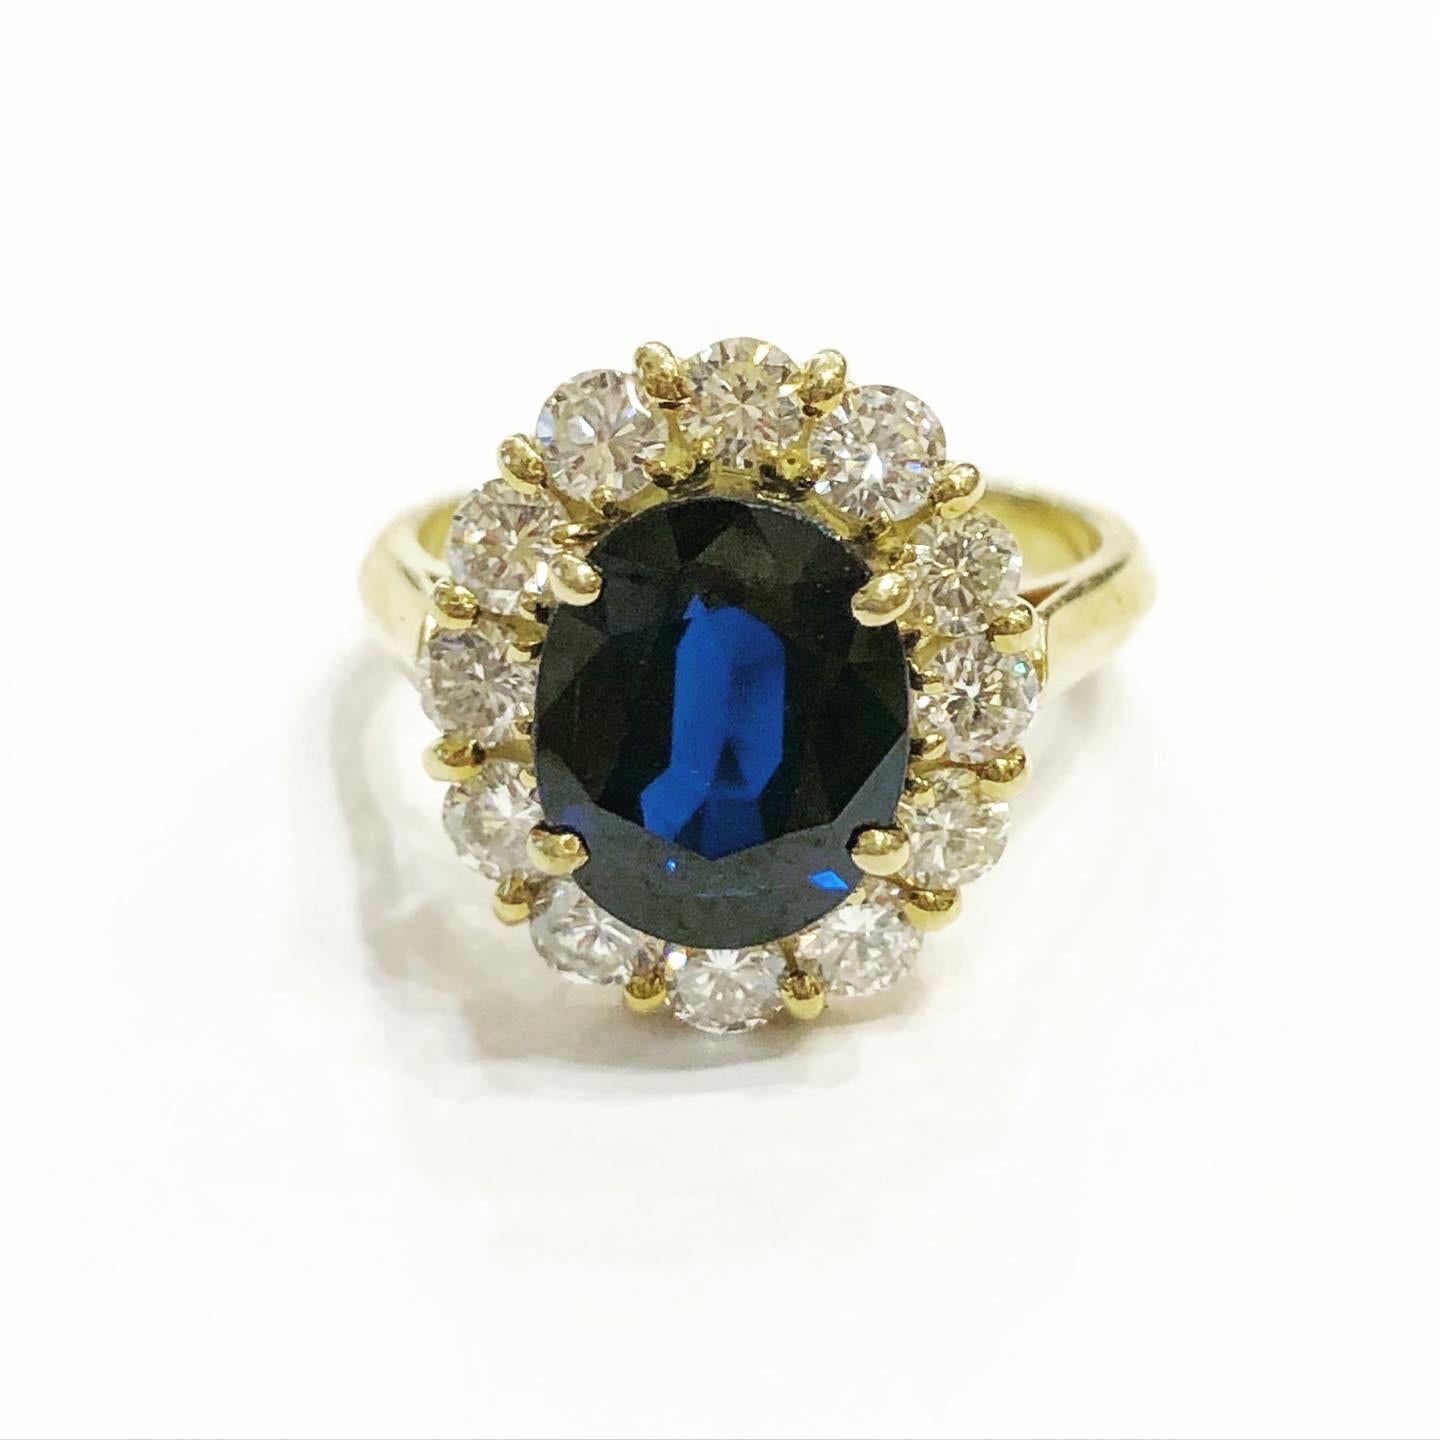 Classic 1960s ,oval sapphire and diamonds halo yellow gold cluster engagement ring.
A classically designed 18 karat yellow gold ring an oval blue sapphire surrounded by round brilliant diamonds. Often referred to as the Princess Diana ring, this